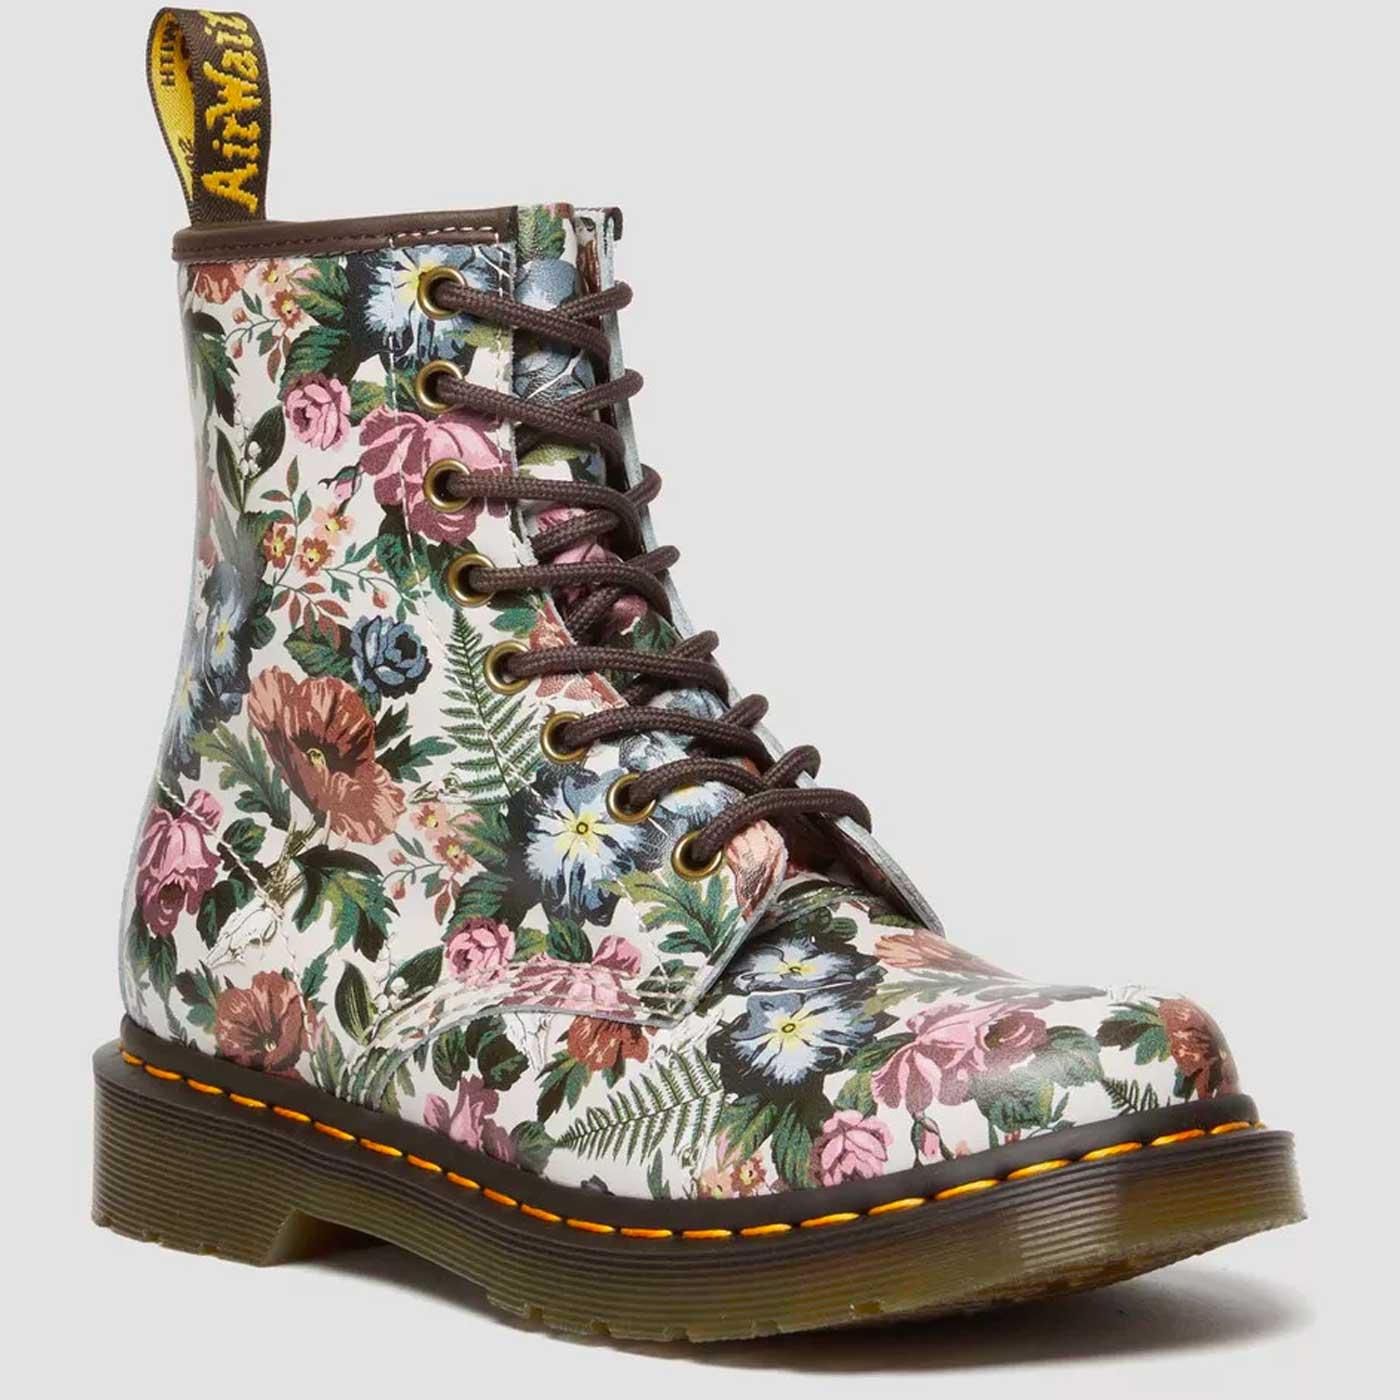 1460 Dr Martens English Garden Backhand Lace Boots